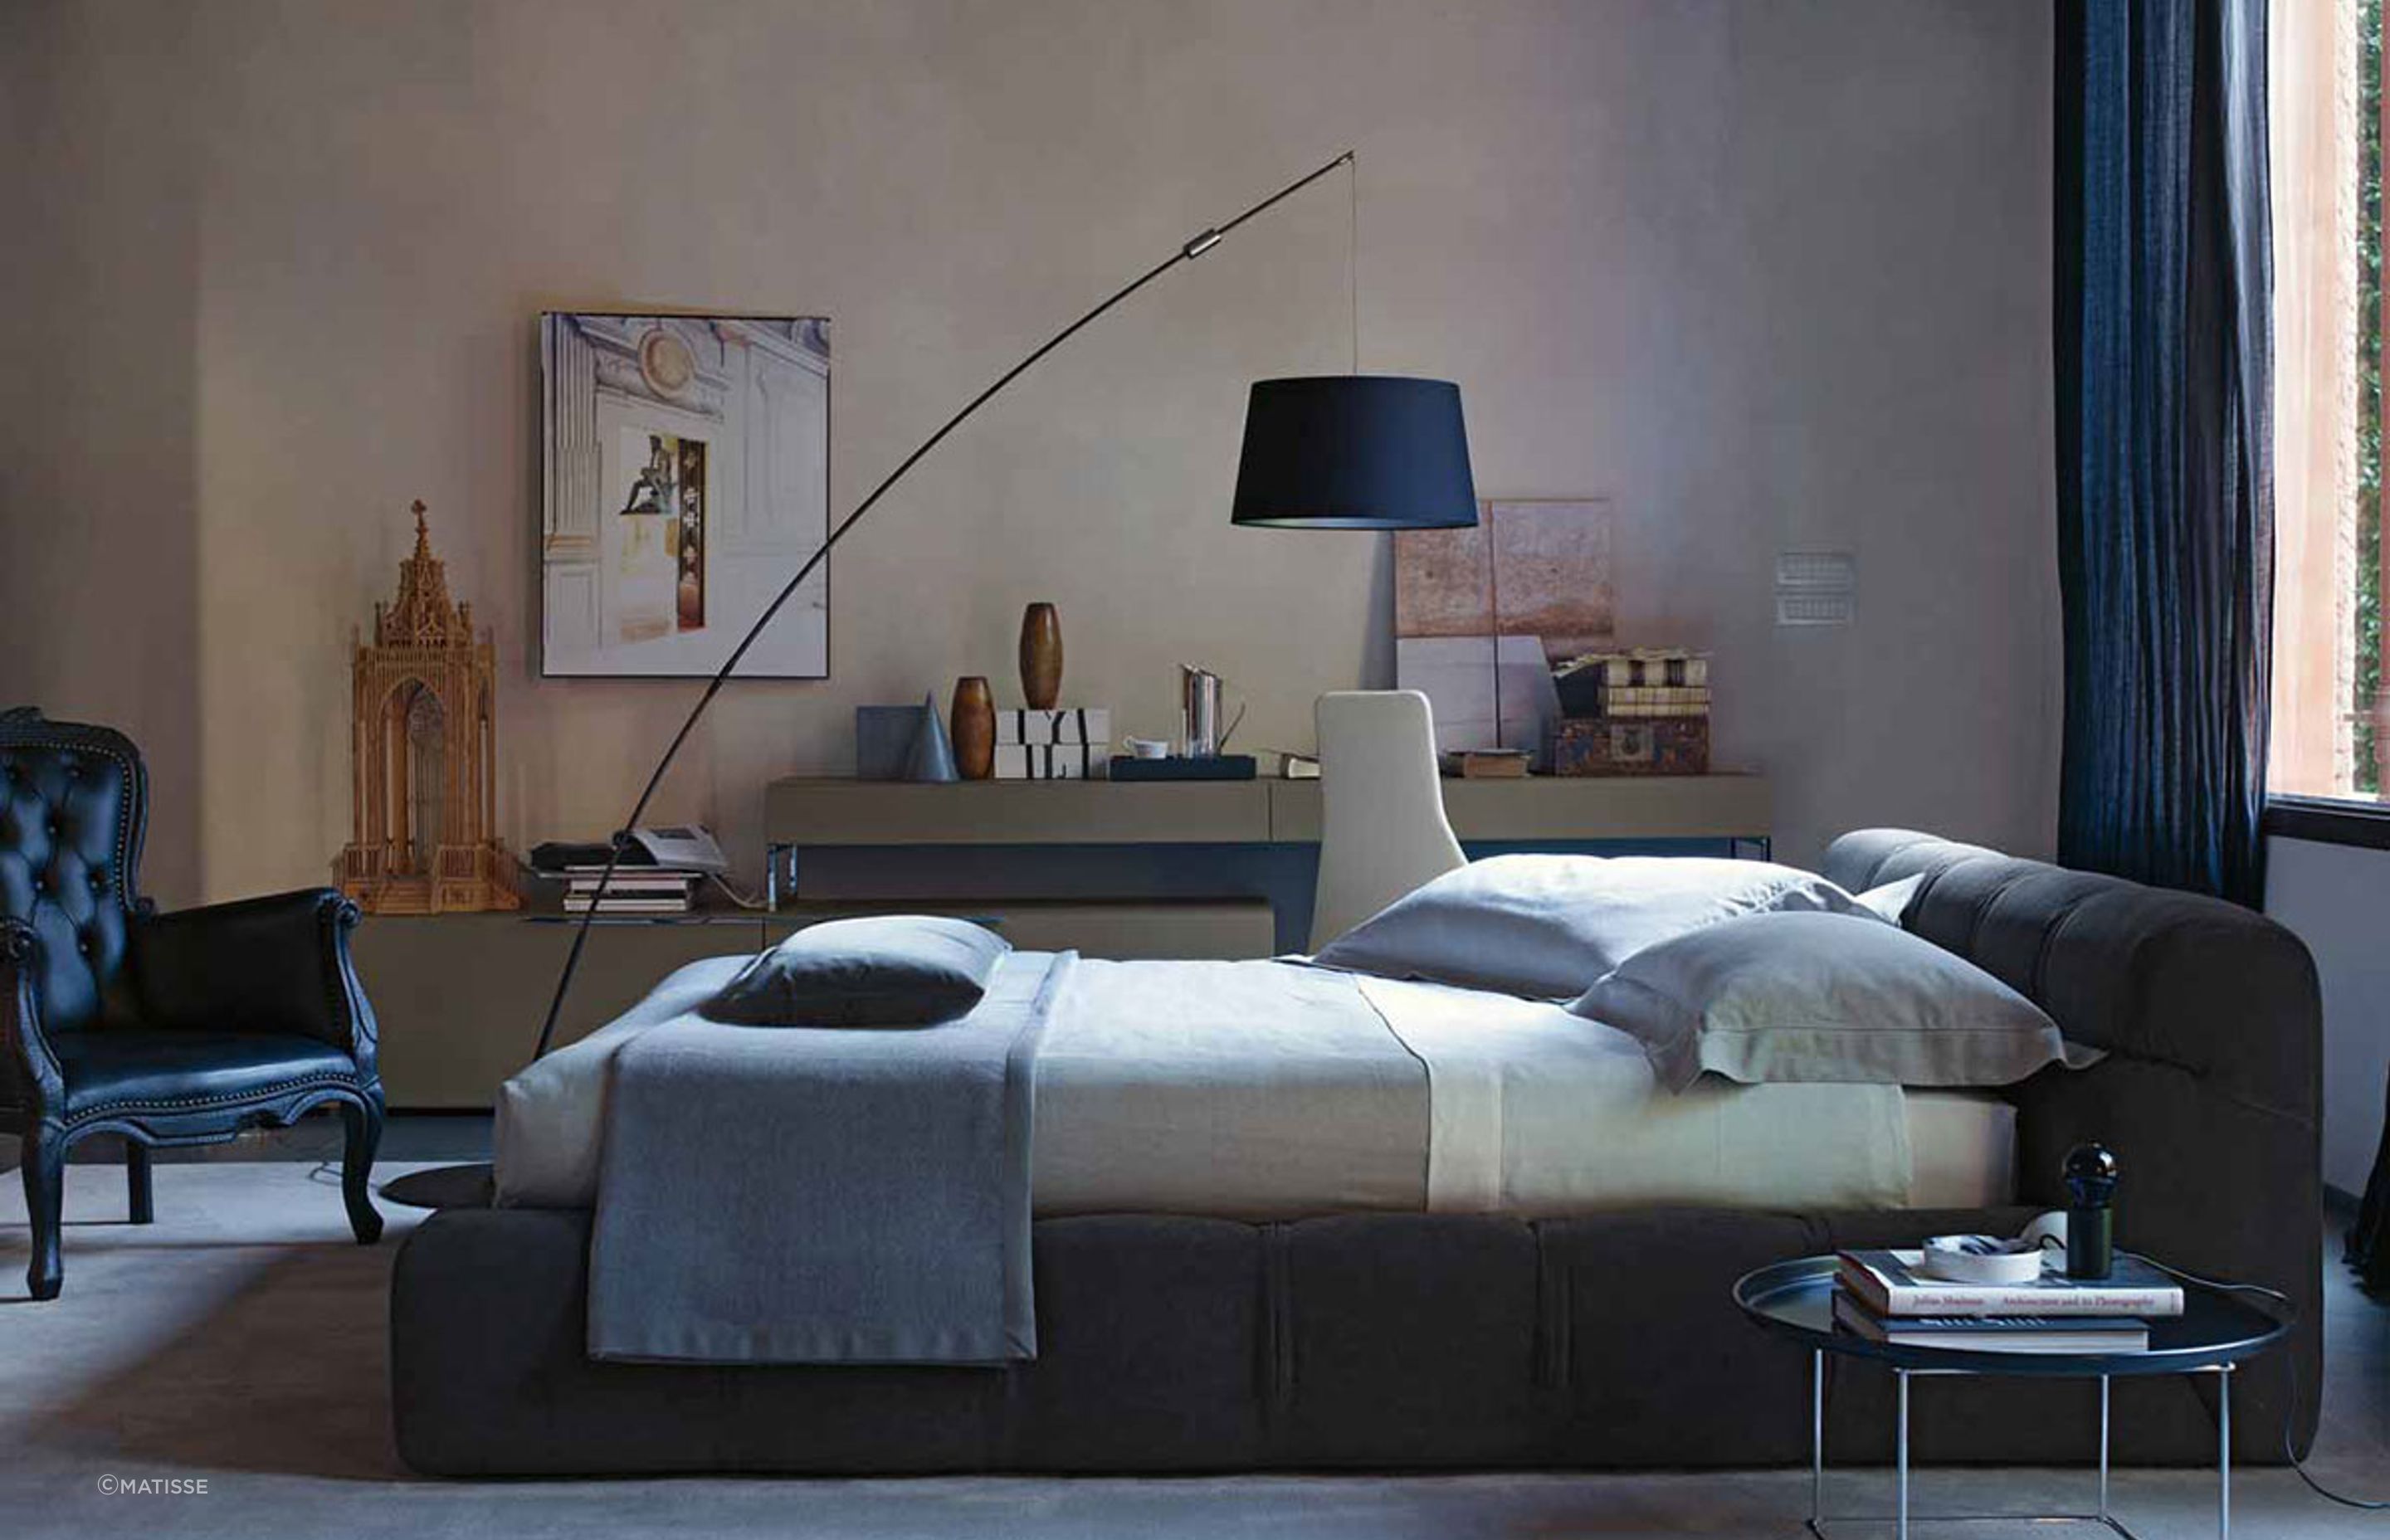 A well balanced colour palette can make all the difference as shown here with the Tufty Bed by B&amp;B Italia.